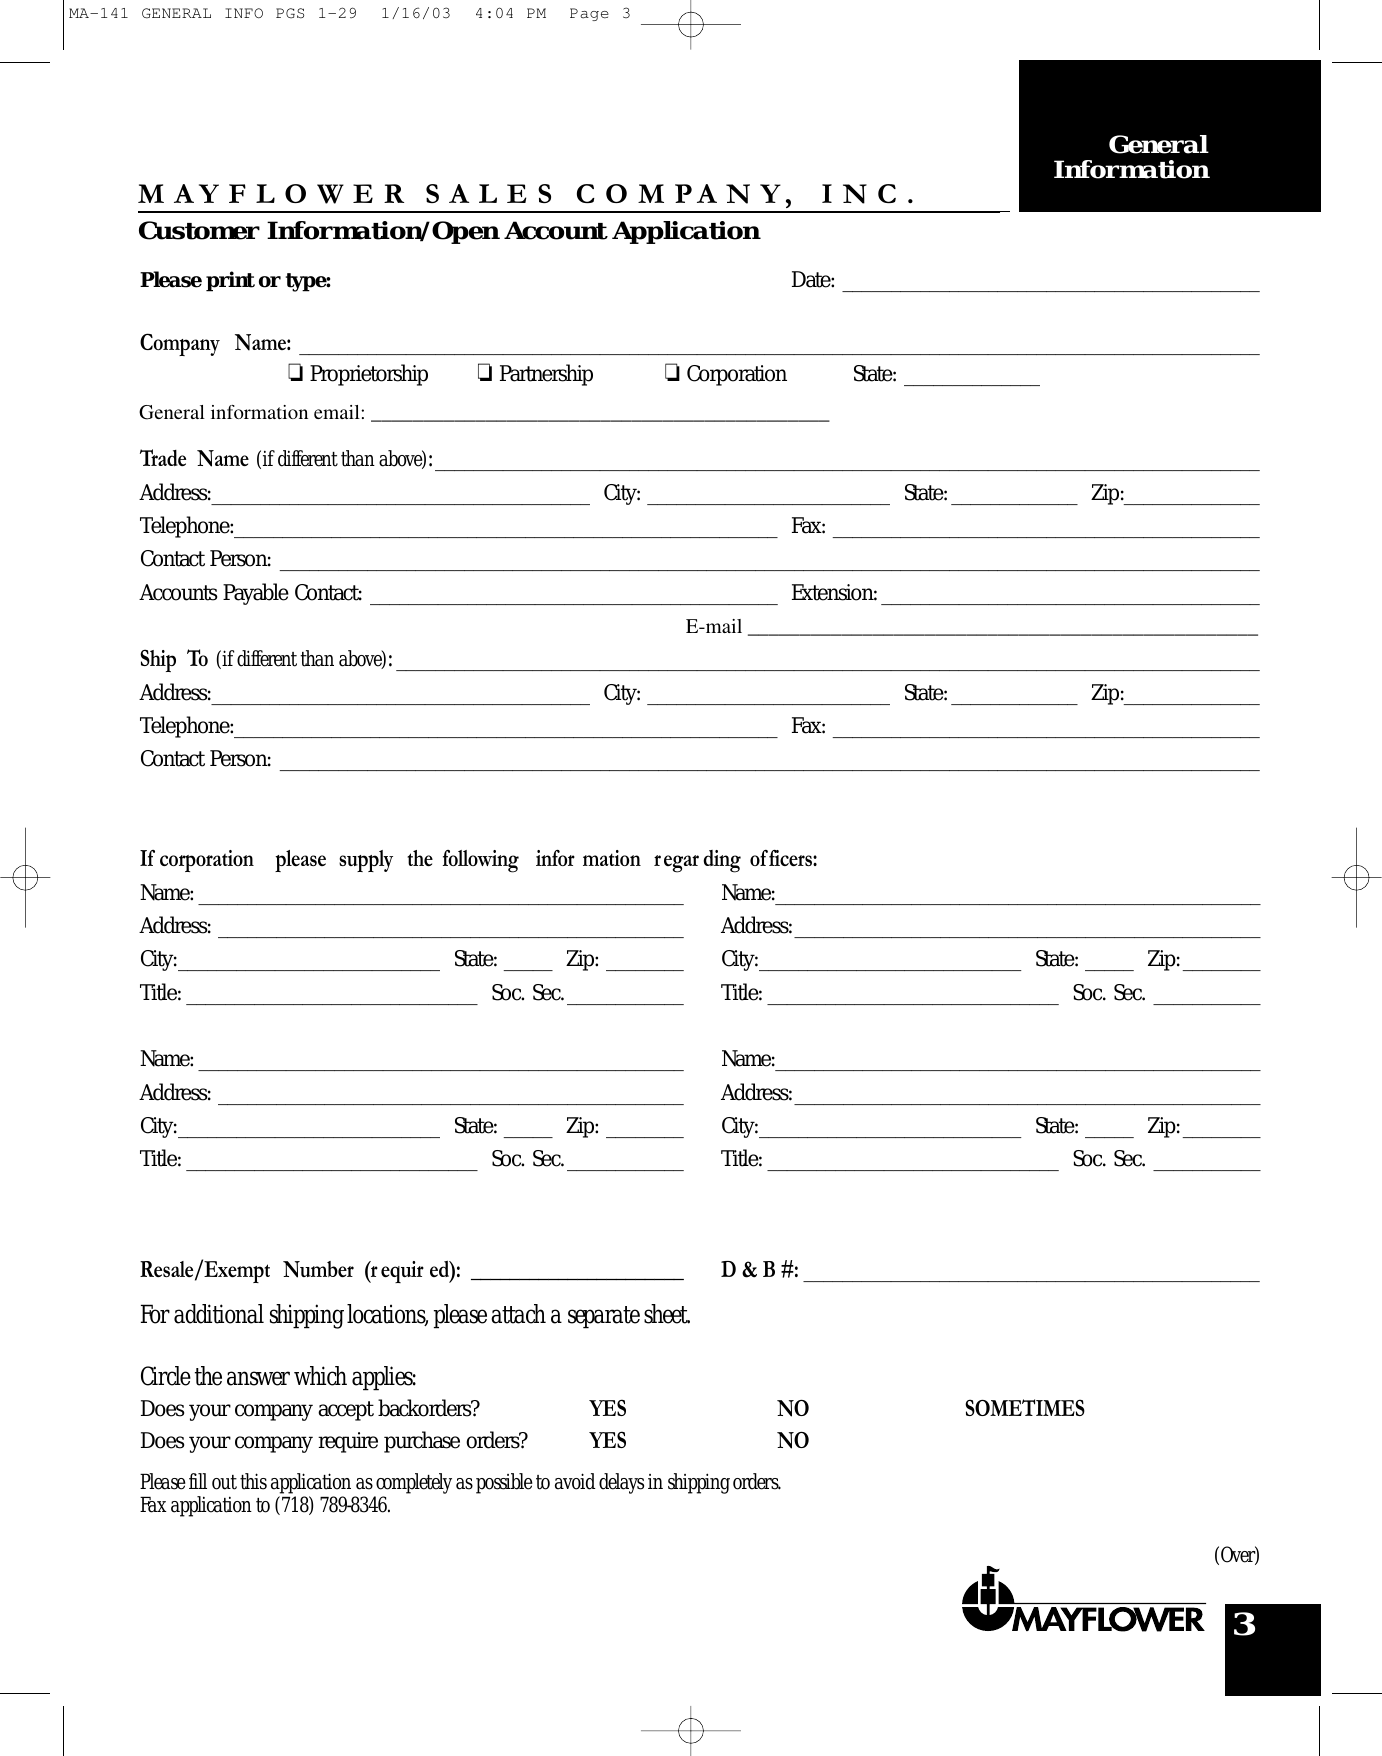 Page 1 of 2 - Locks MA-141 GENERAL INFO PGS 1-29 Customer Information/Open Account Application 3-4a